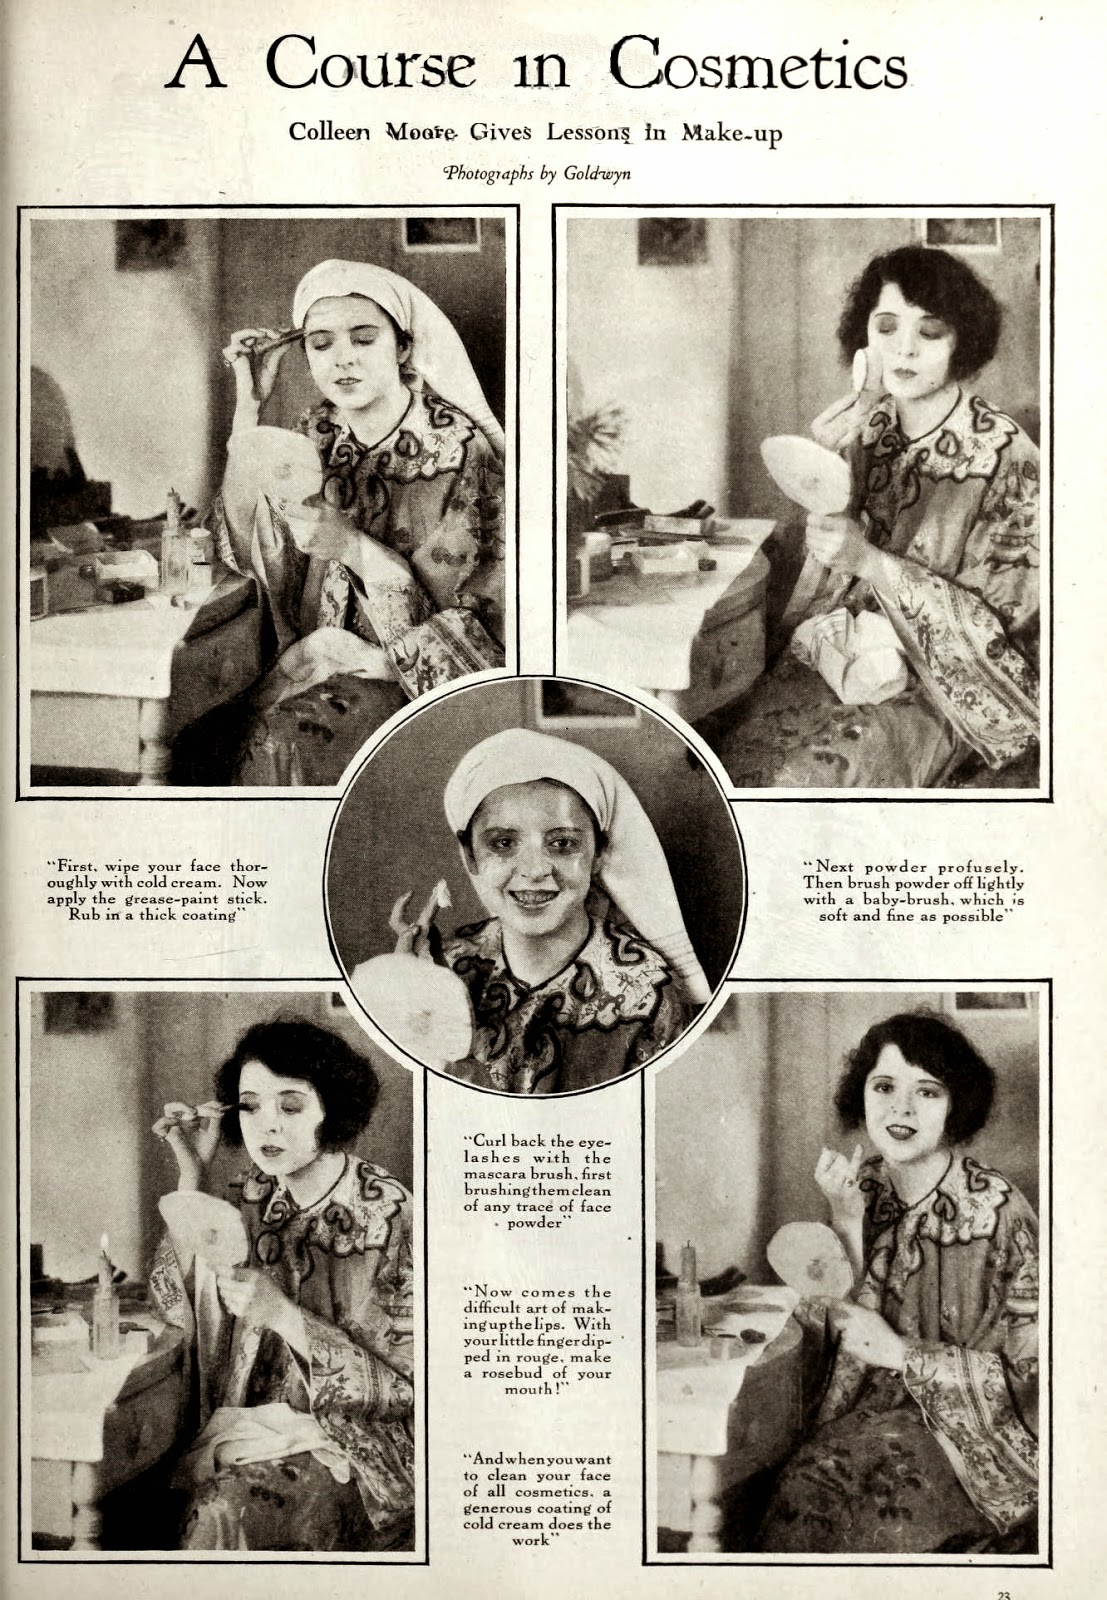 Colleen Moore gives lessons in make-up